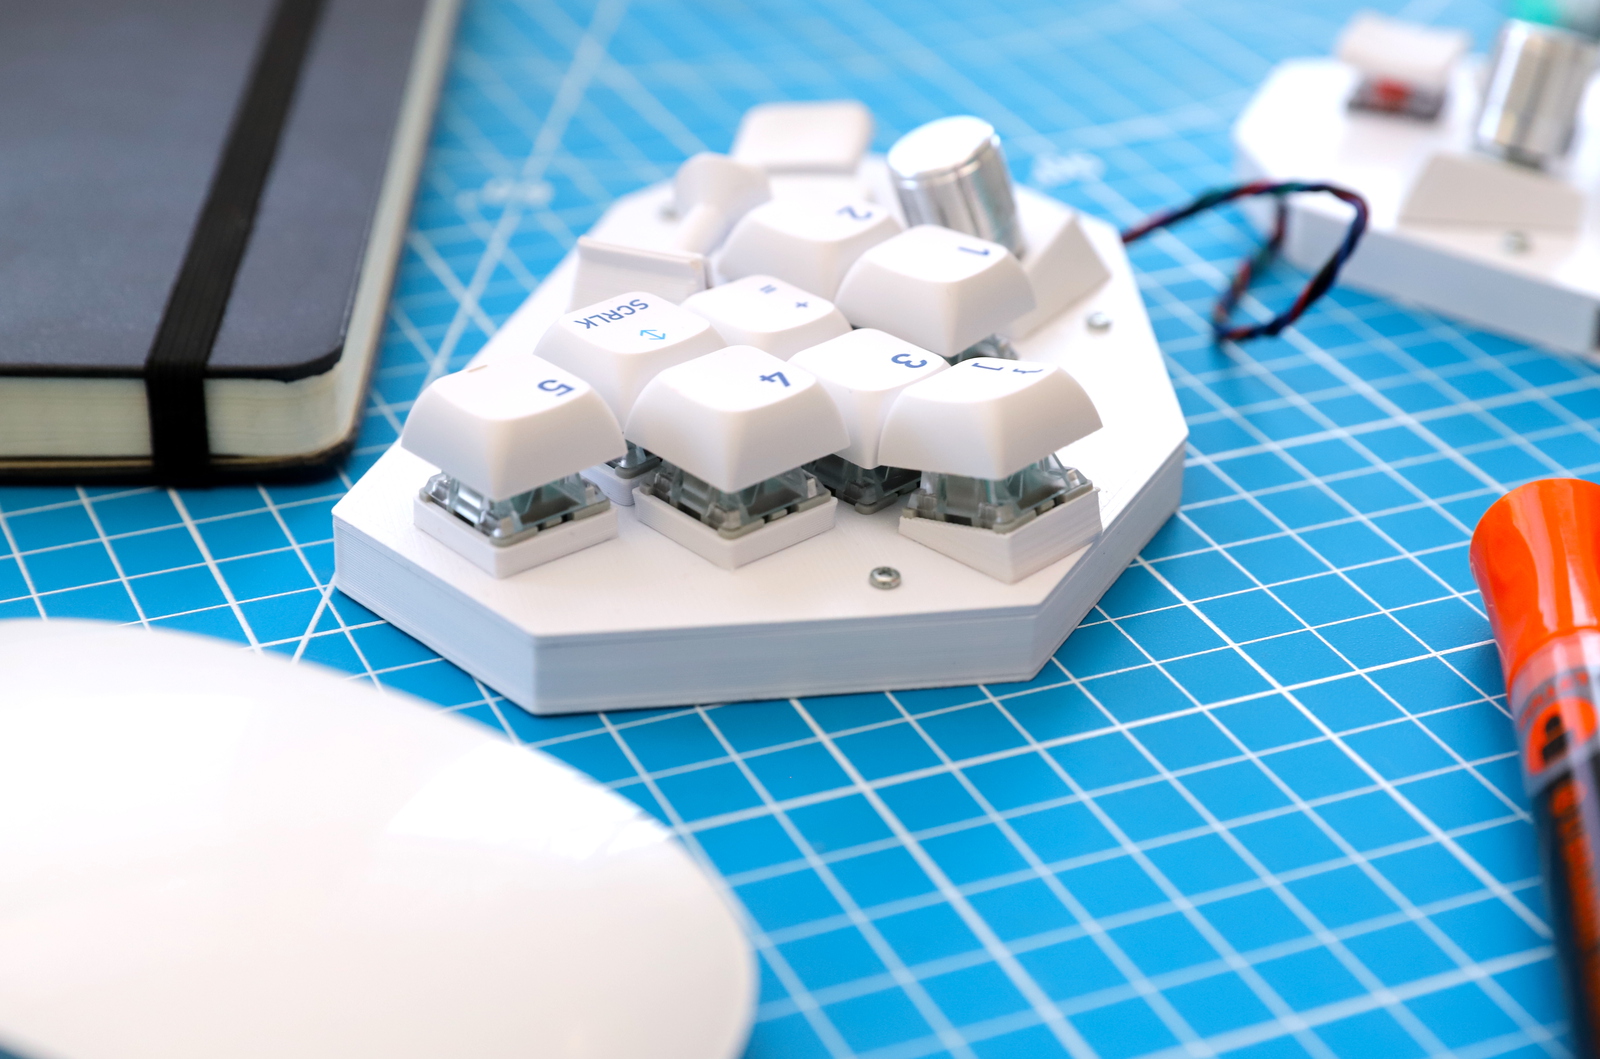 Photo of the Fulcrum Keyboard Detail